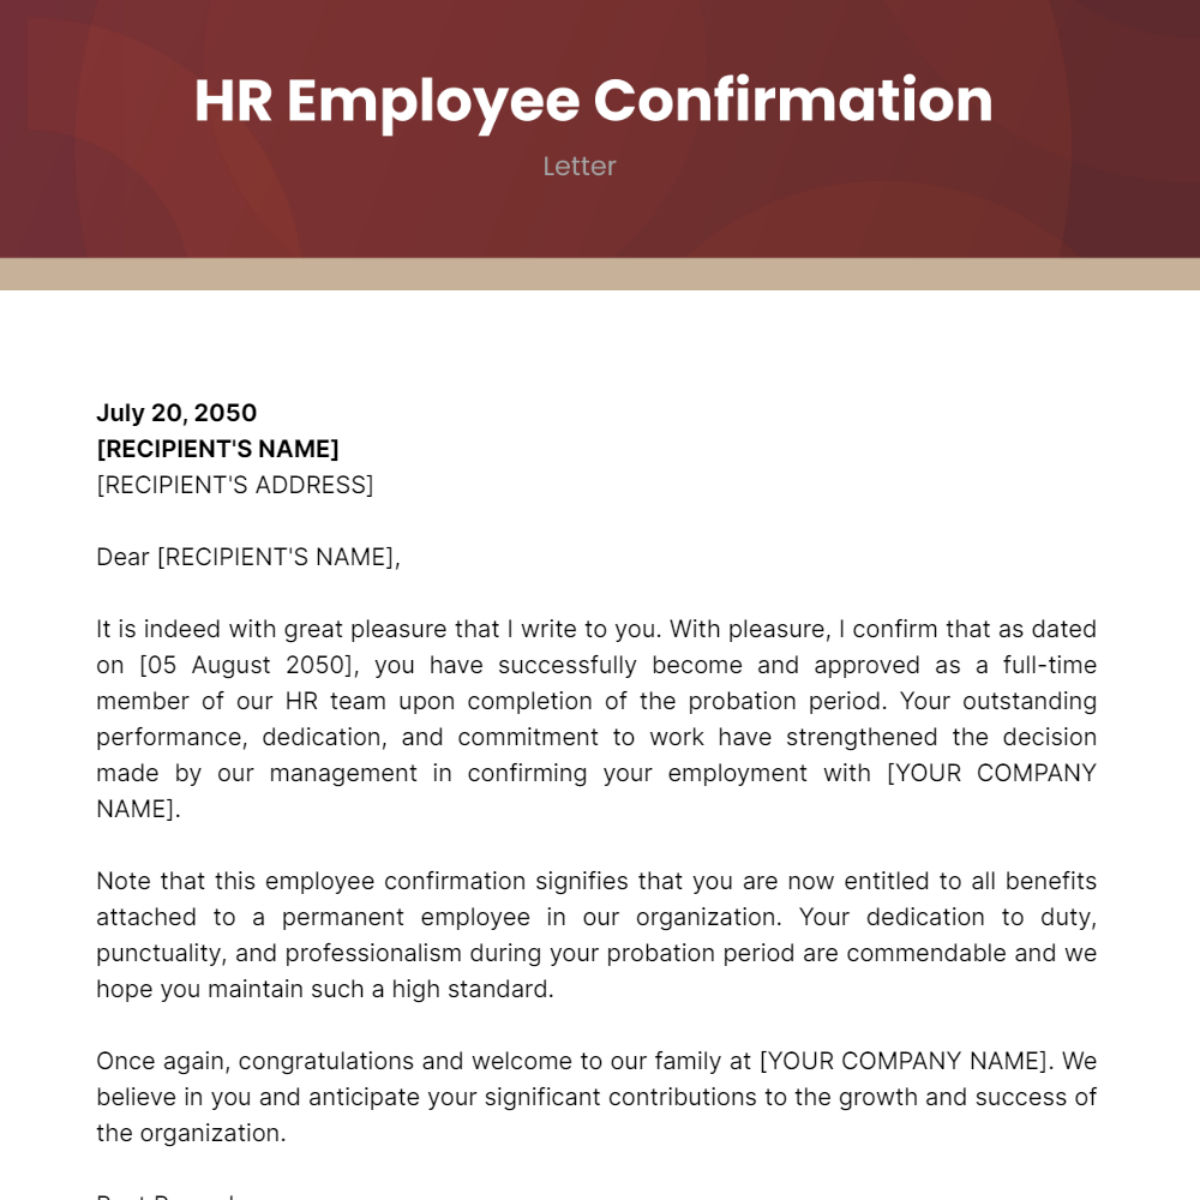 HR Employee Confirmation Letter Template